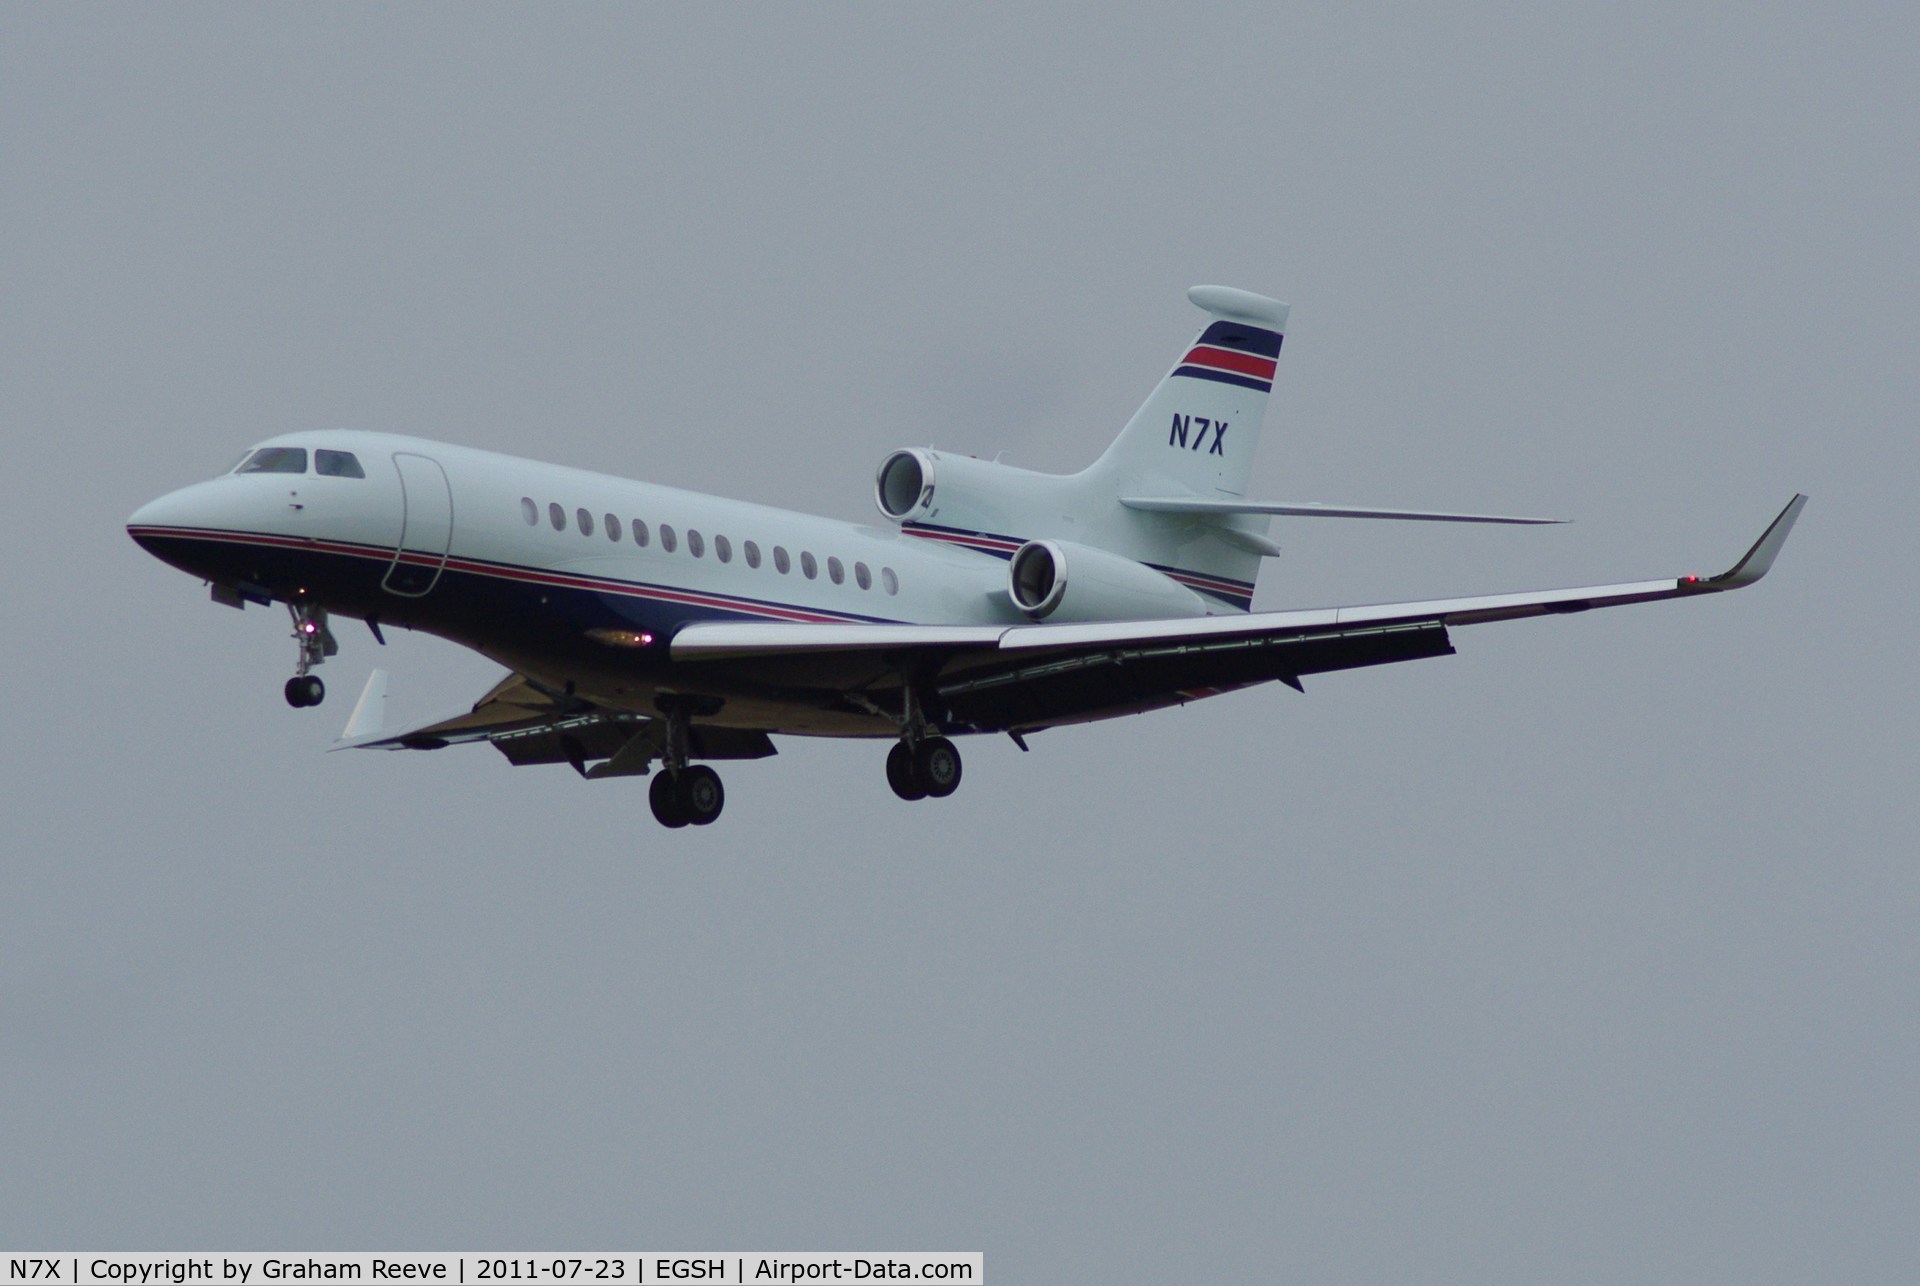 N7X, 2008 Dassault Falcon 7X C/N 33, About to land.